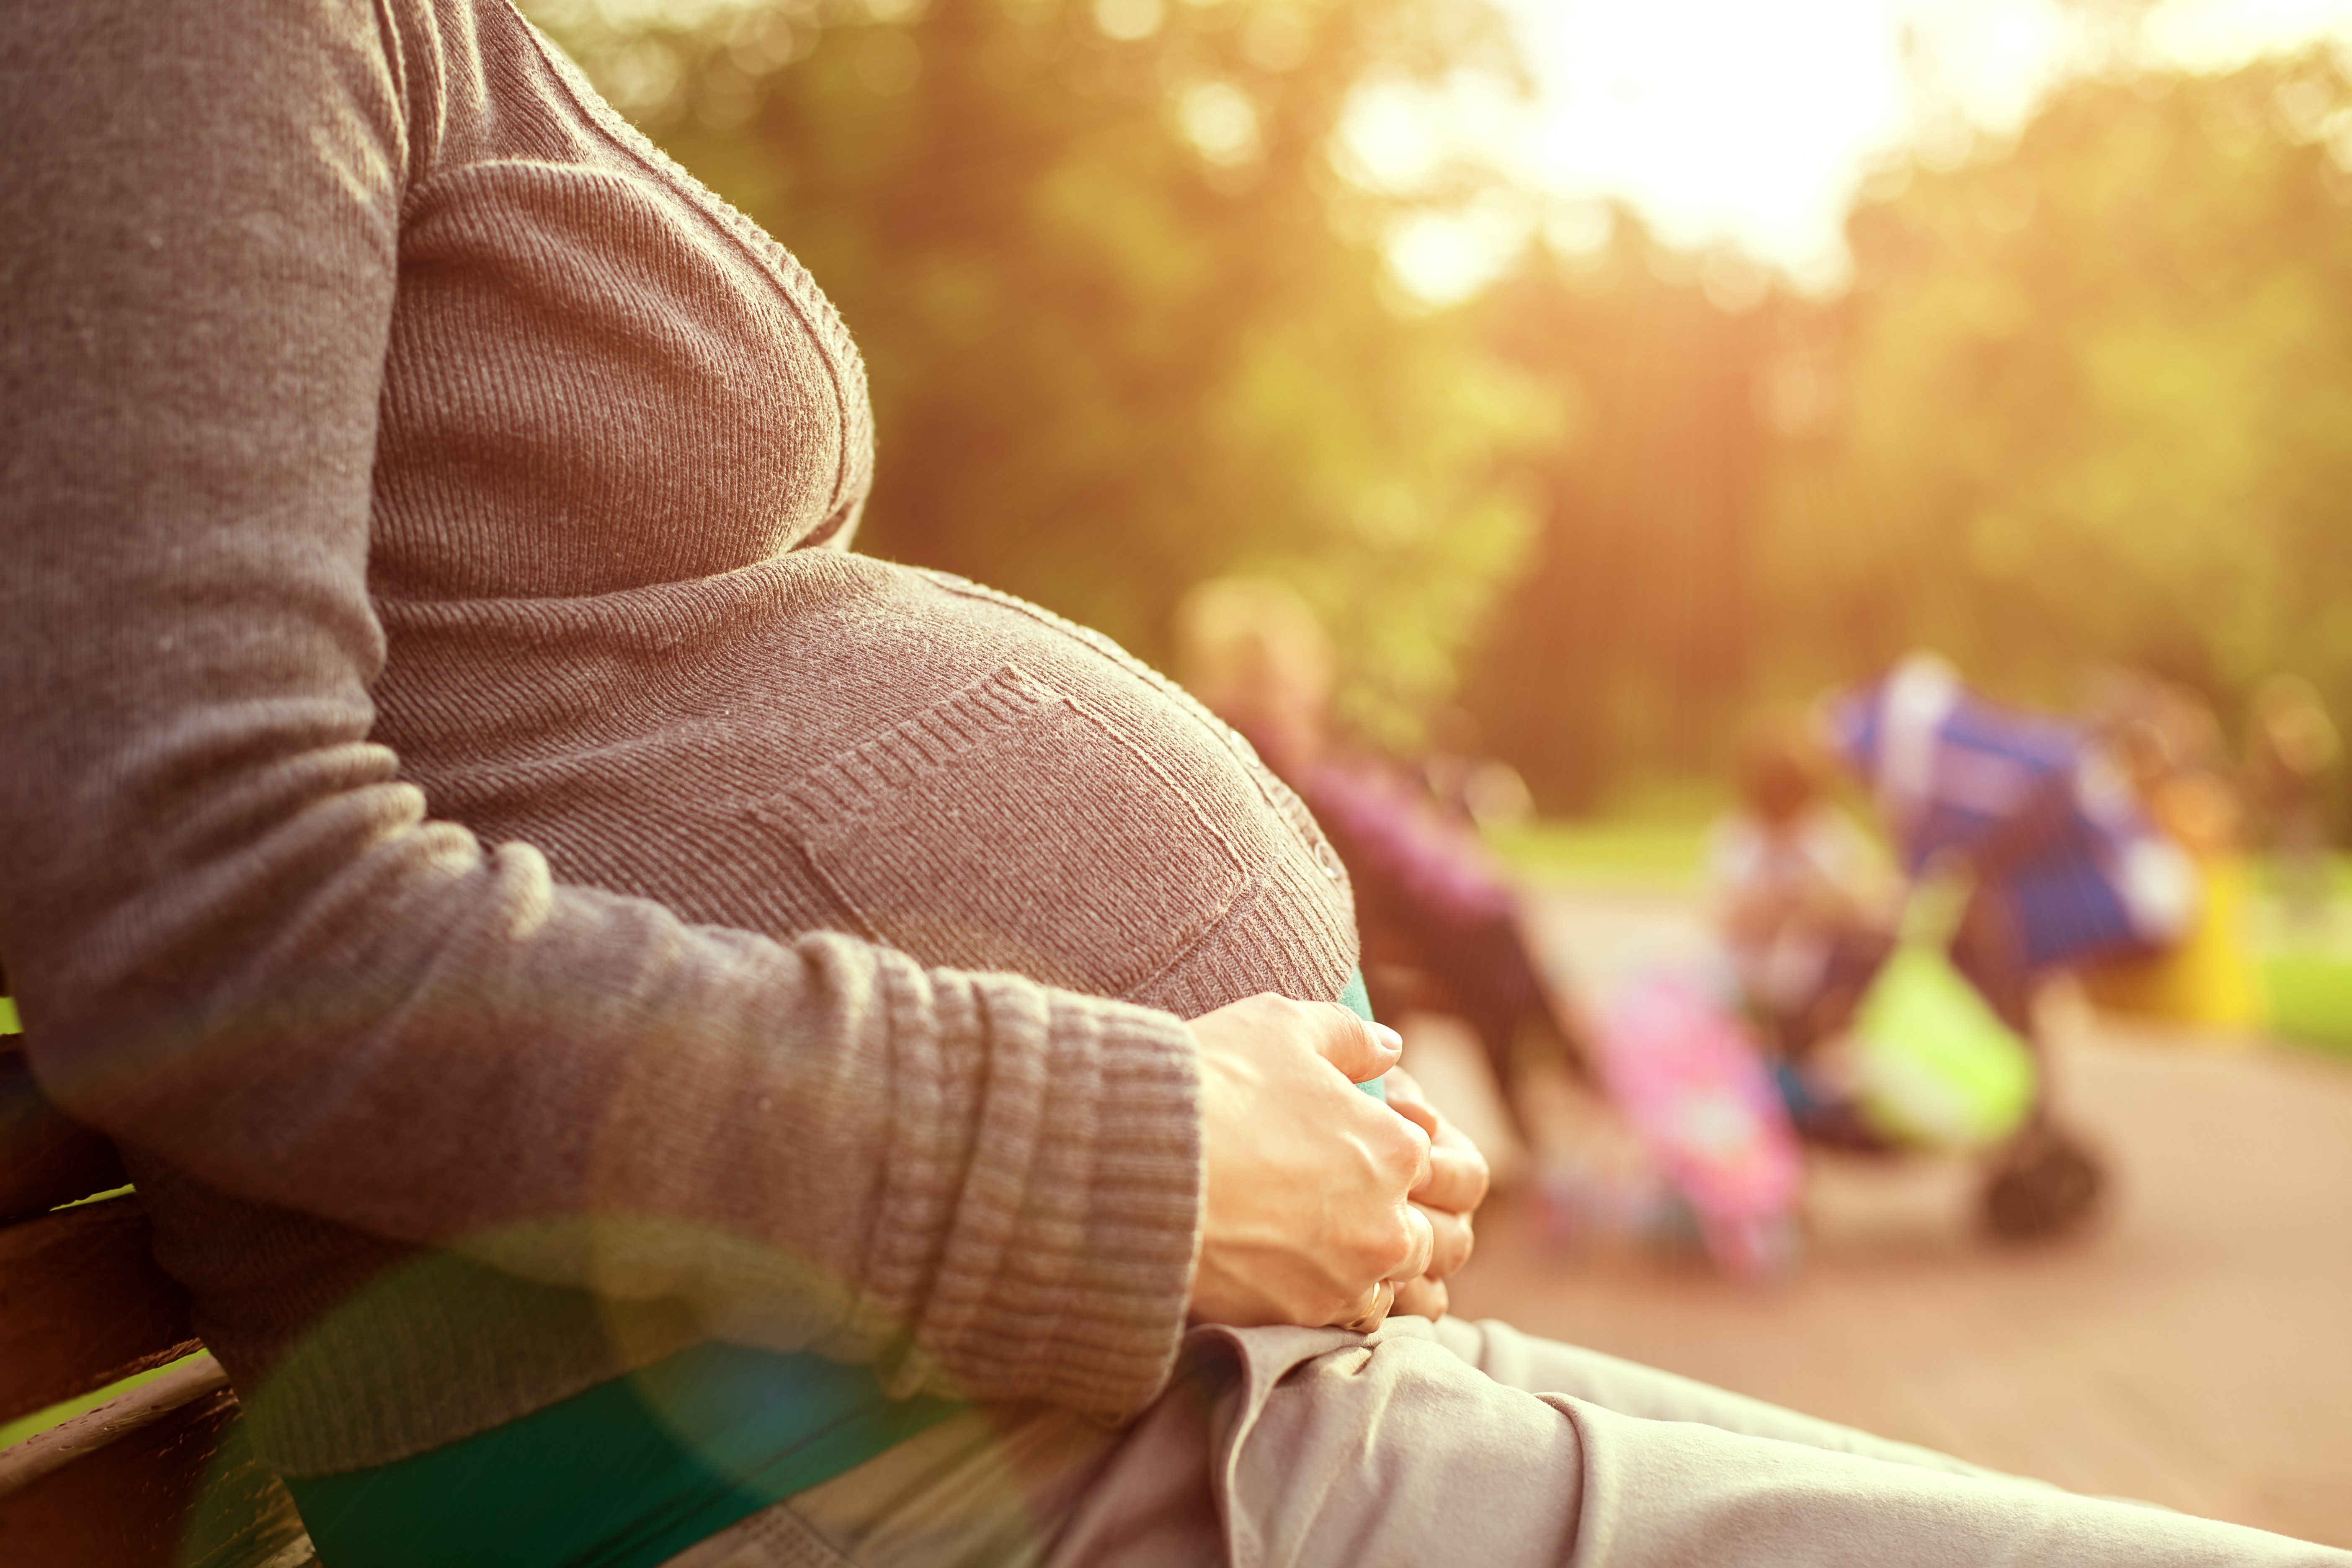 Heavily pregnant woman sitting on a bench outside. | Source: Shutterstock